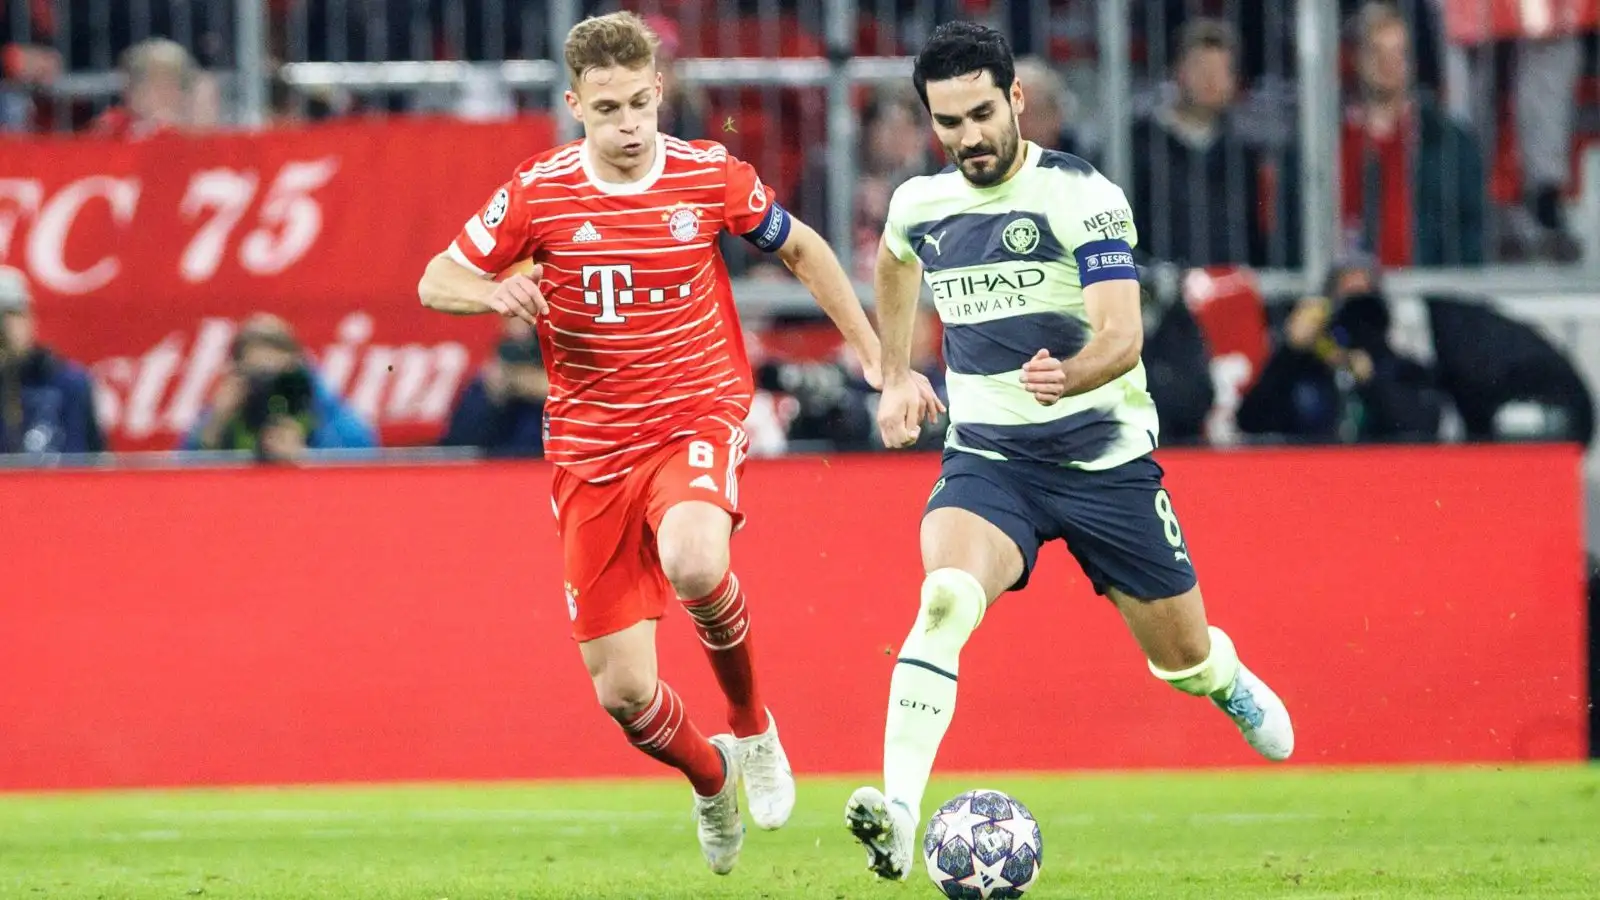 Reported Barcelona targets Joshua Kimmich and Ilkay Gundogan during a Champions League match